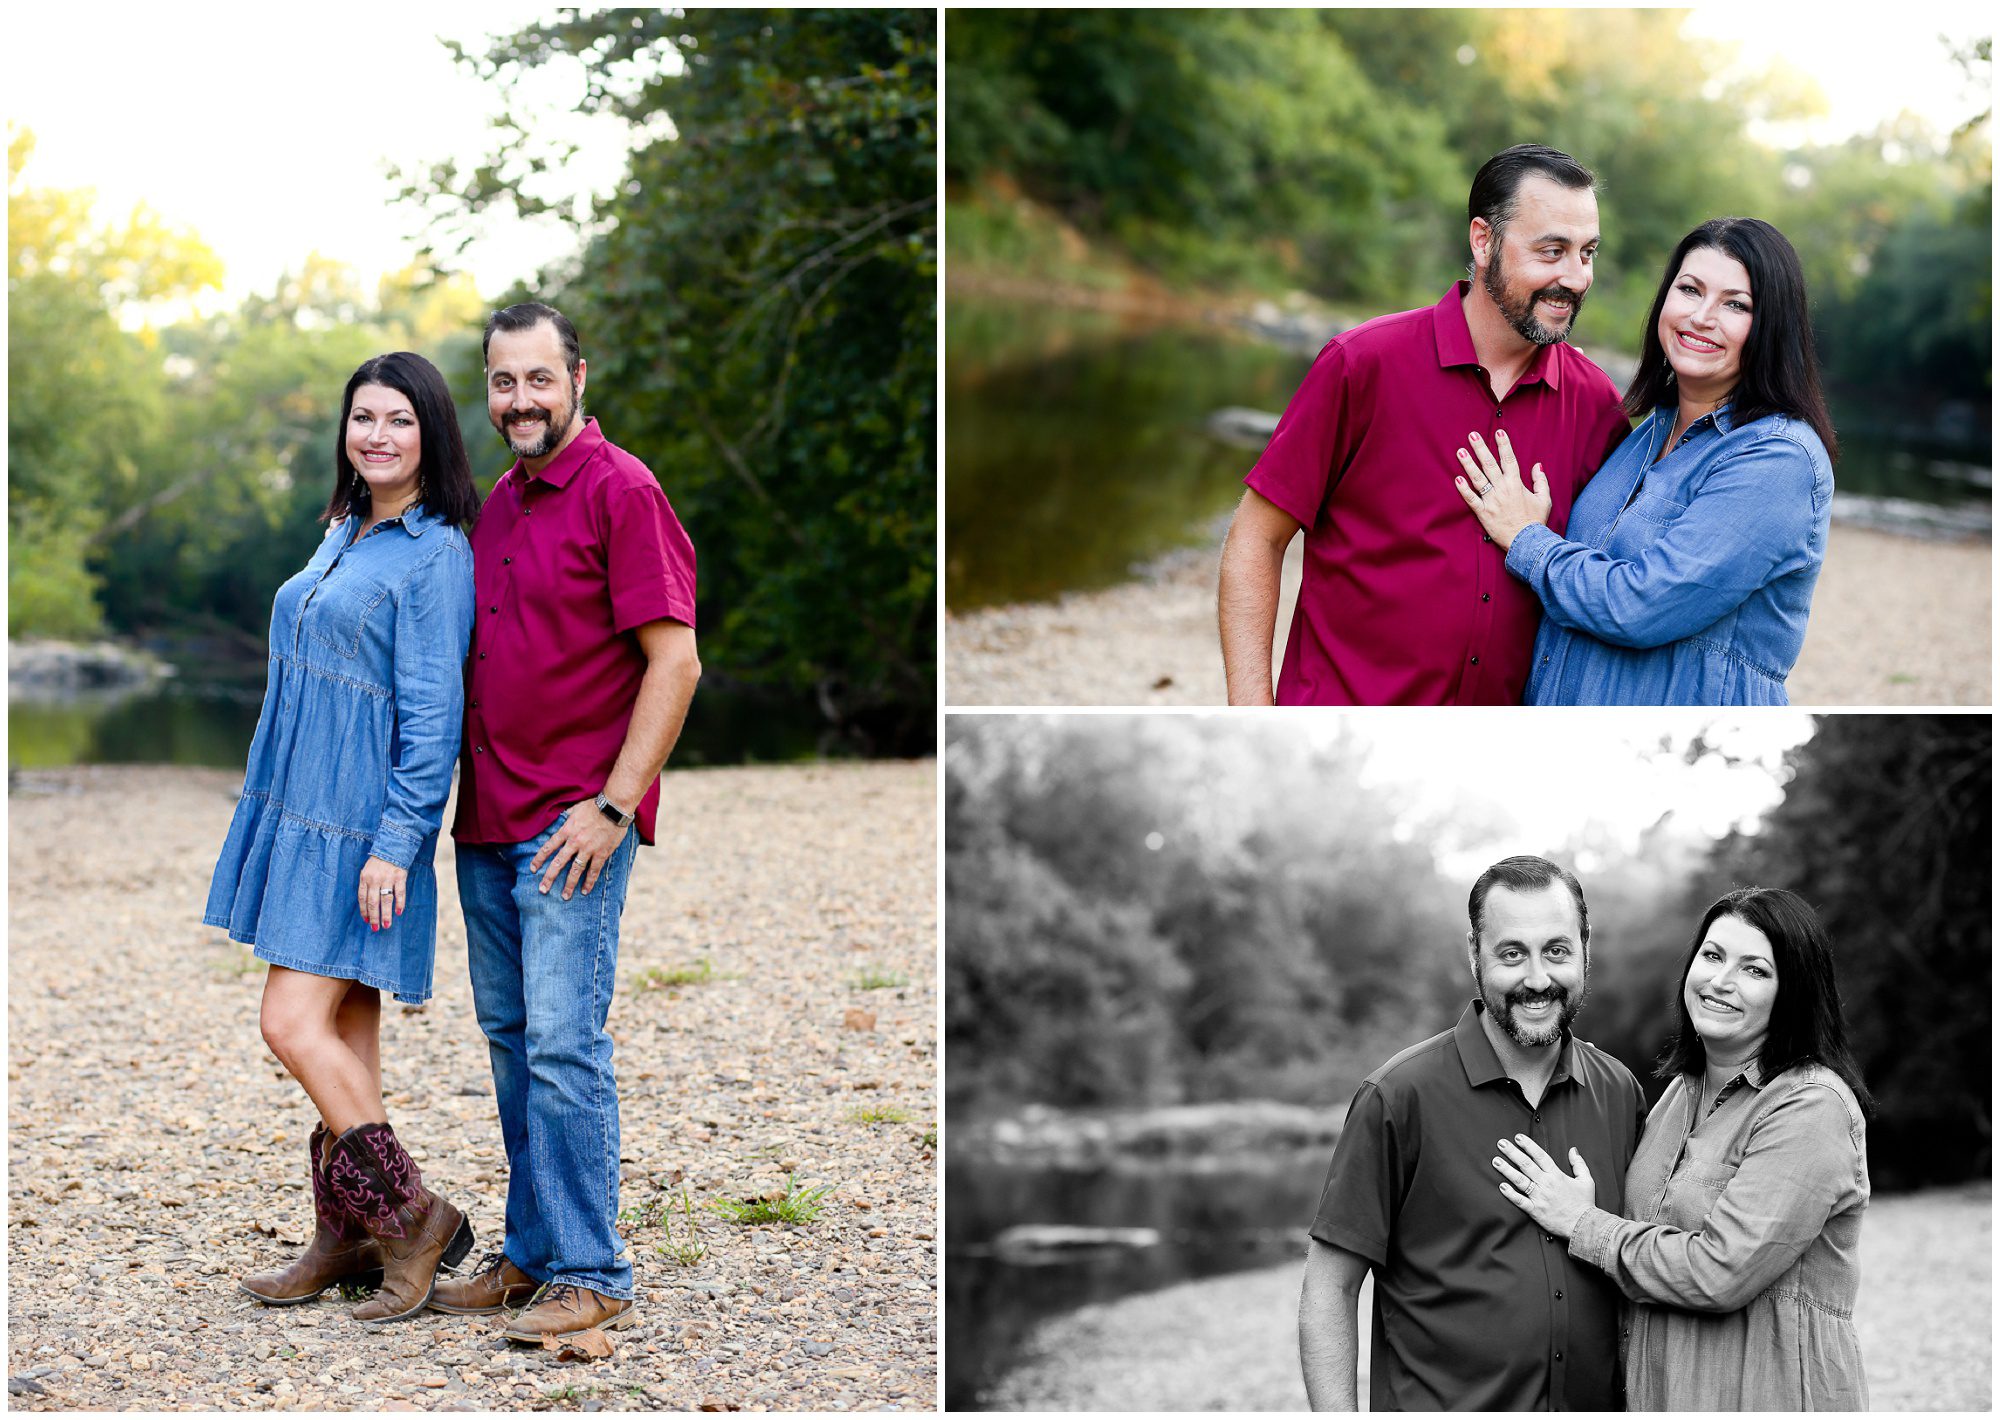 Fluvanna Triplet Family Portraits by the River Charlottesville Photographer Pictures Siblings Photography Photoshoot Session Summer Fall Brother Sisters Dog